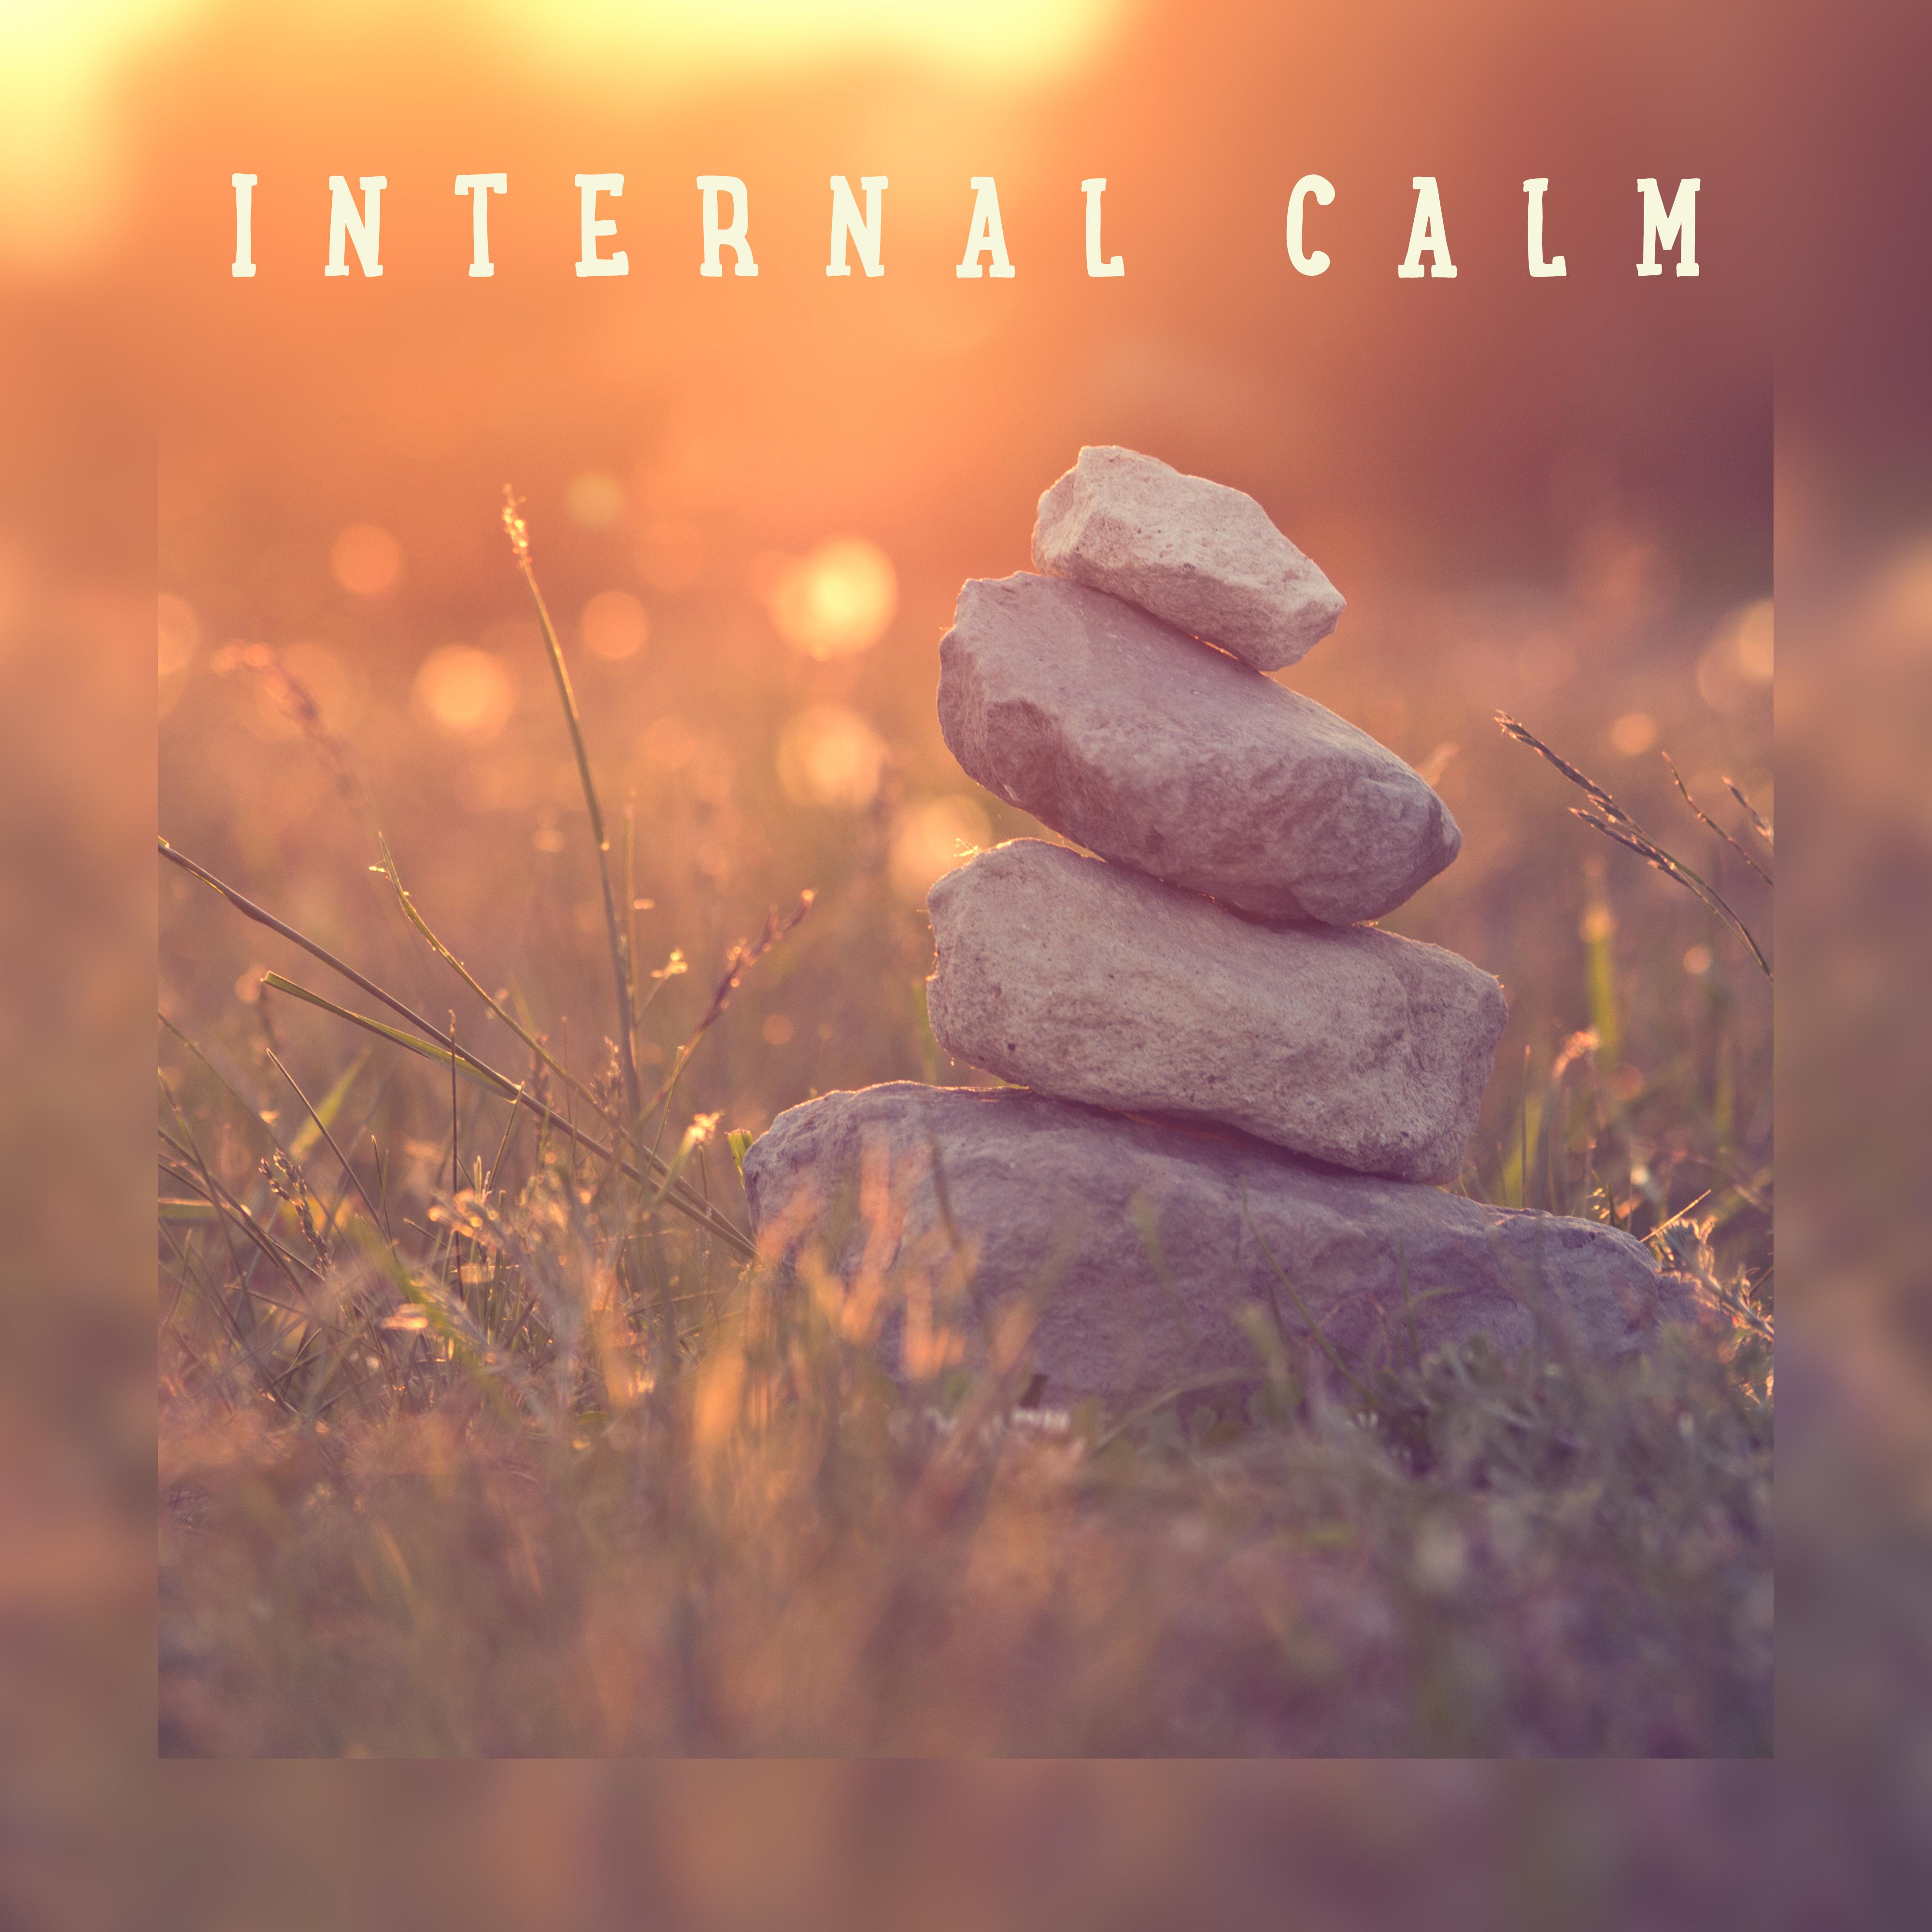 Internal Calm: Relaxing Music that Relieves Stress, Anger and Tension